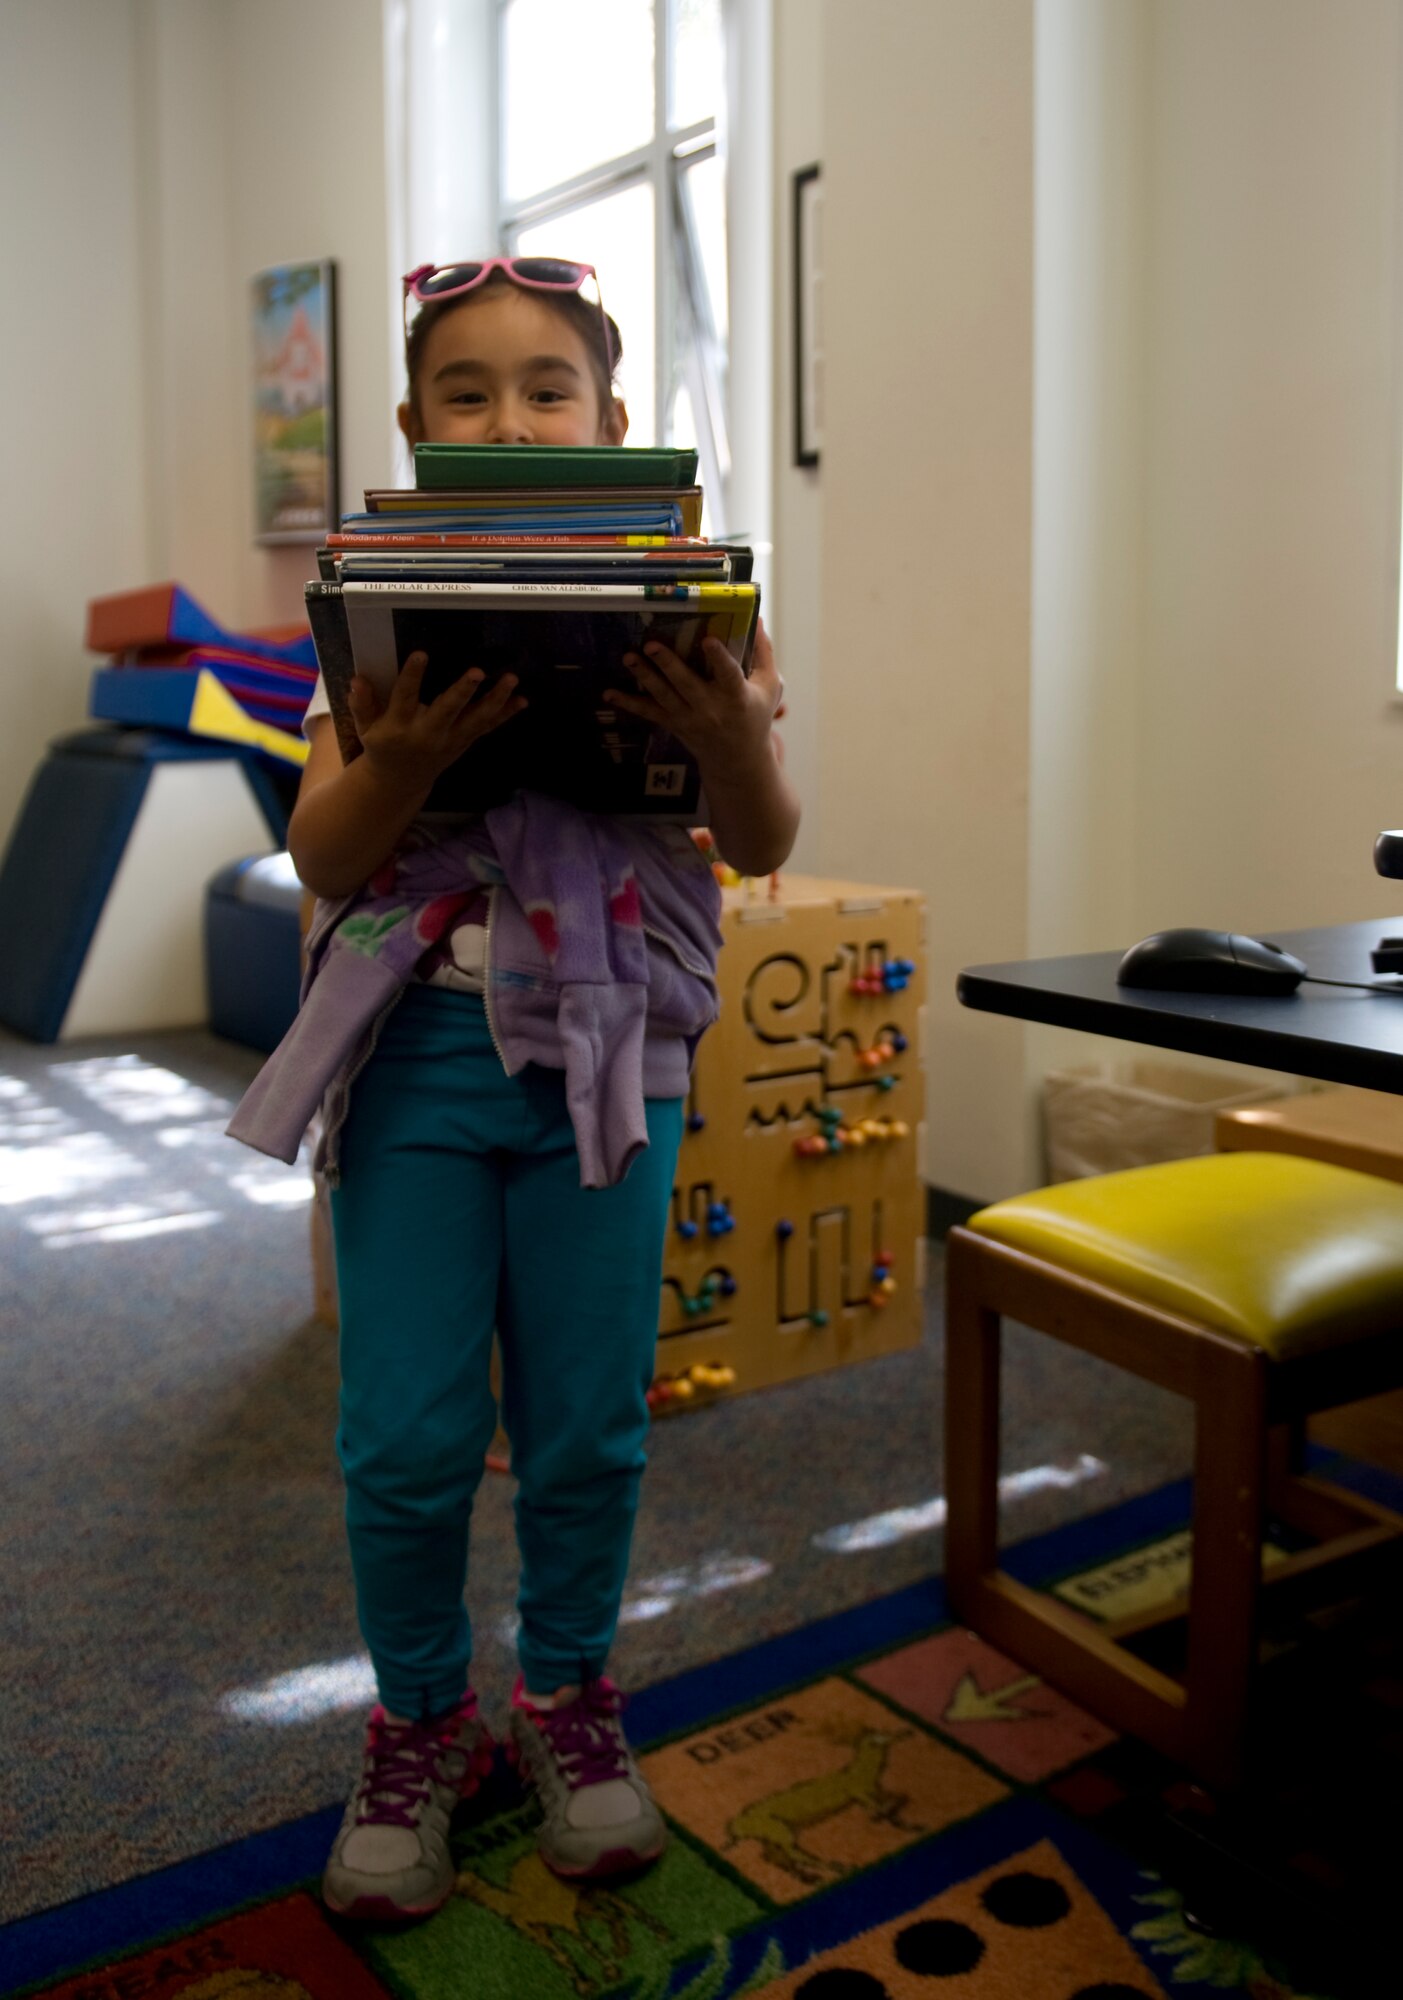 Kaitlyn Thomas, 6, daughter of Tech. Sgt. Bryan Thomas, 823rd RED HORSE Squadron, carries her books in the children’s section of the base library at Hurlburt Field, Fla., March 18, 2014. She said she loves books because they teach her a lot of words. (U.S. Air Force photo/Senior Airman Naomi Griego)    